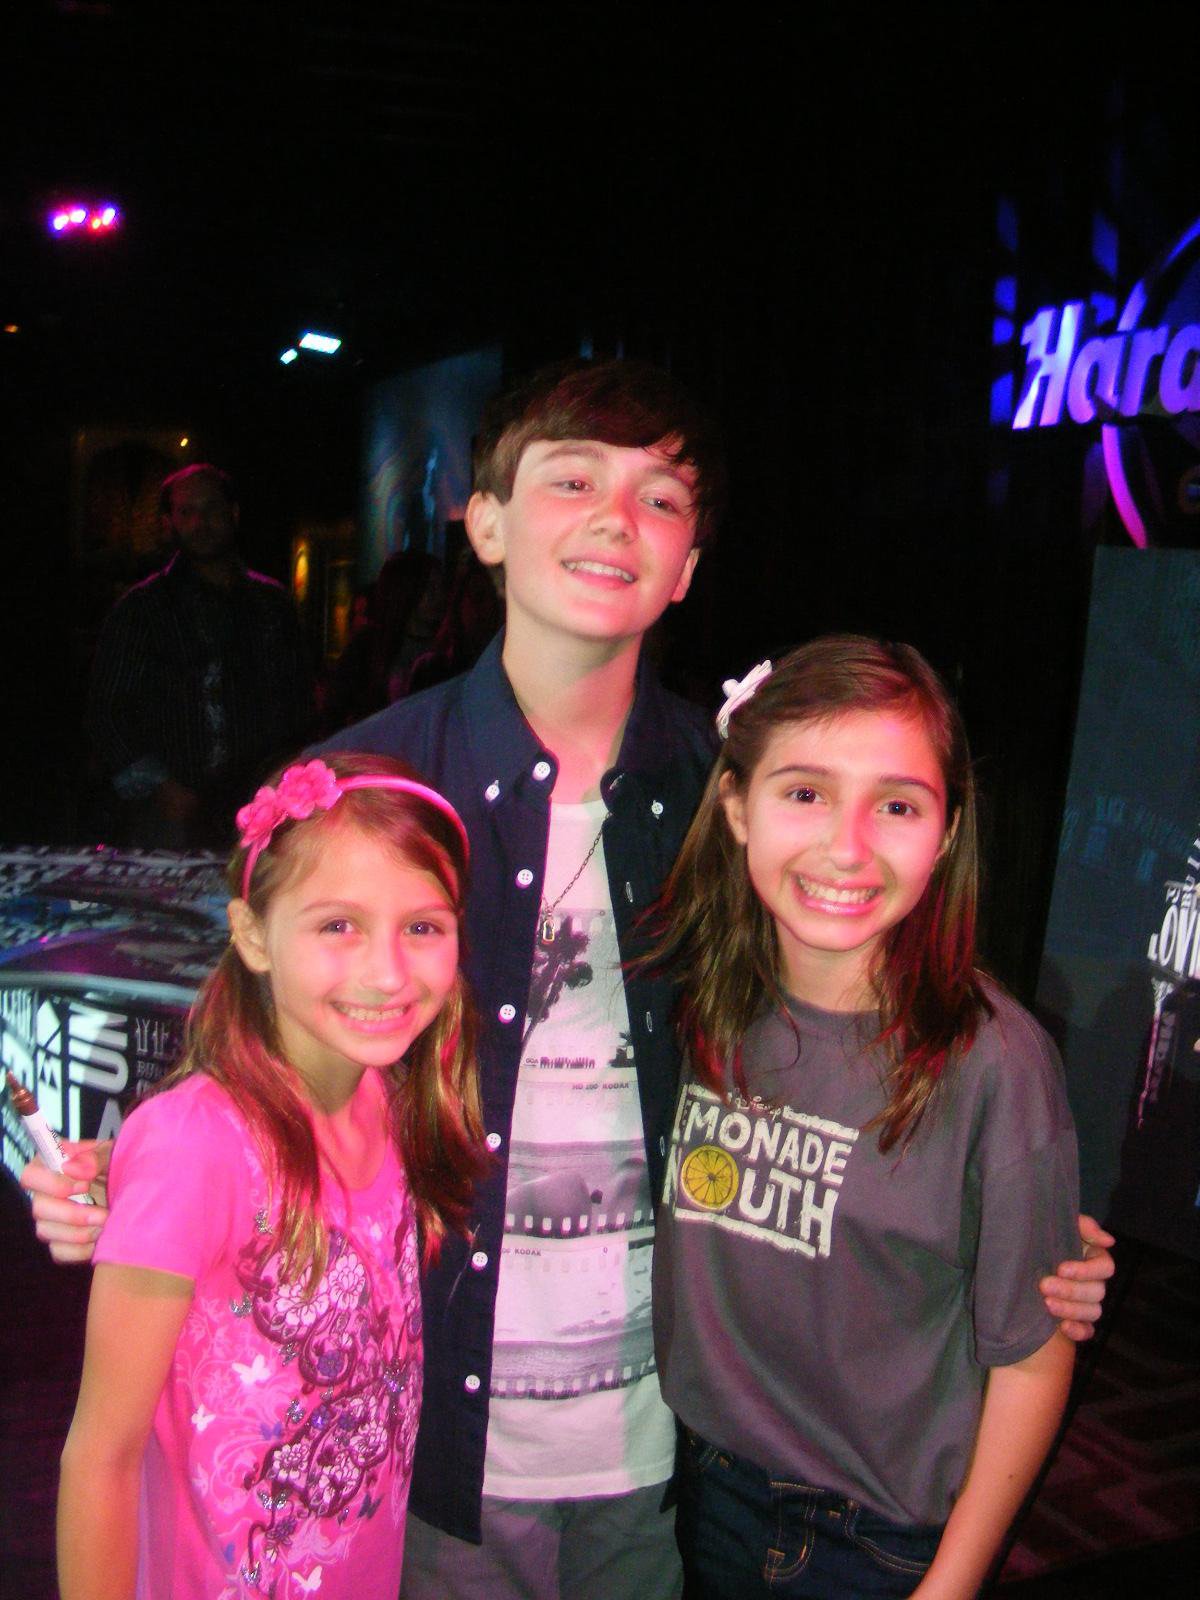 Sophia Strauss with Victoria Strauss and Greyson Chance at the VIP CD Release Party at the Hard Rock Cafe.